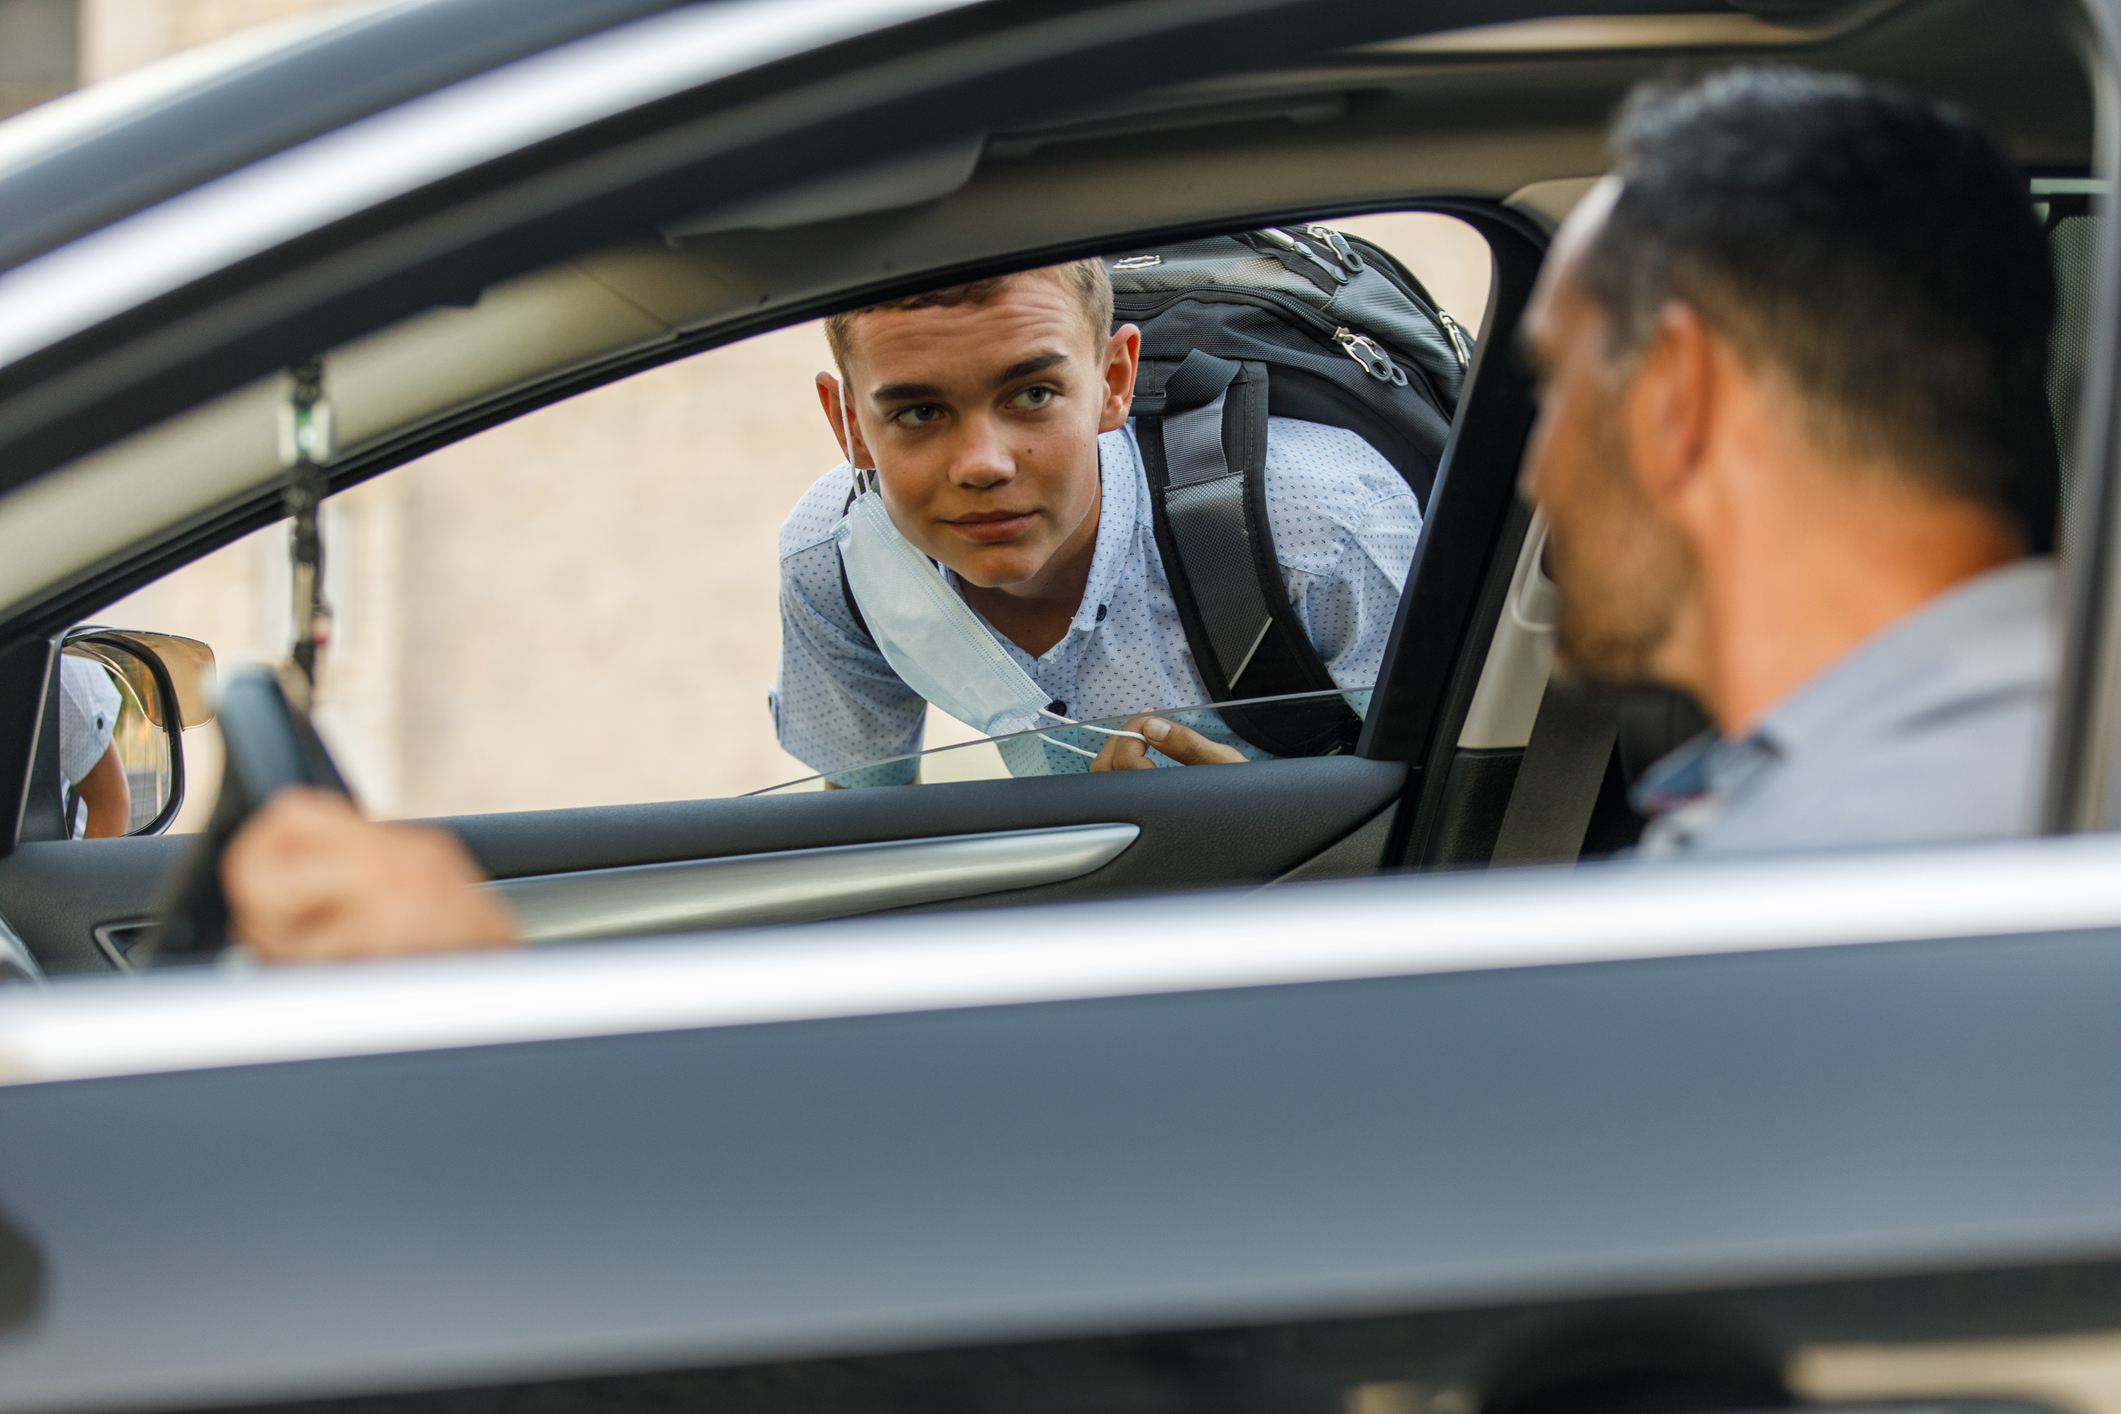 A teenage boy with a backpack talks to a man driving a car through the open passenger window